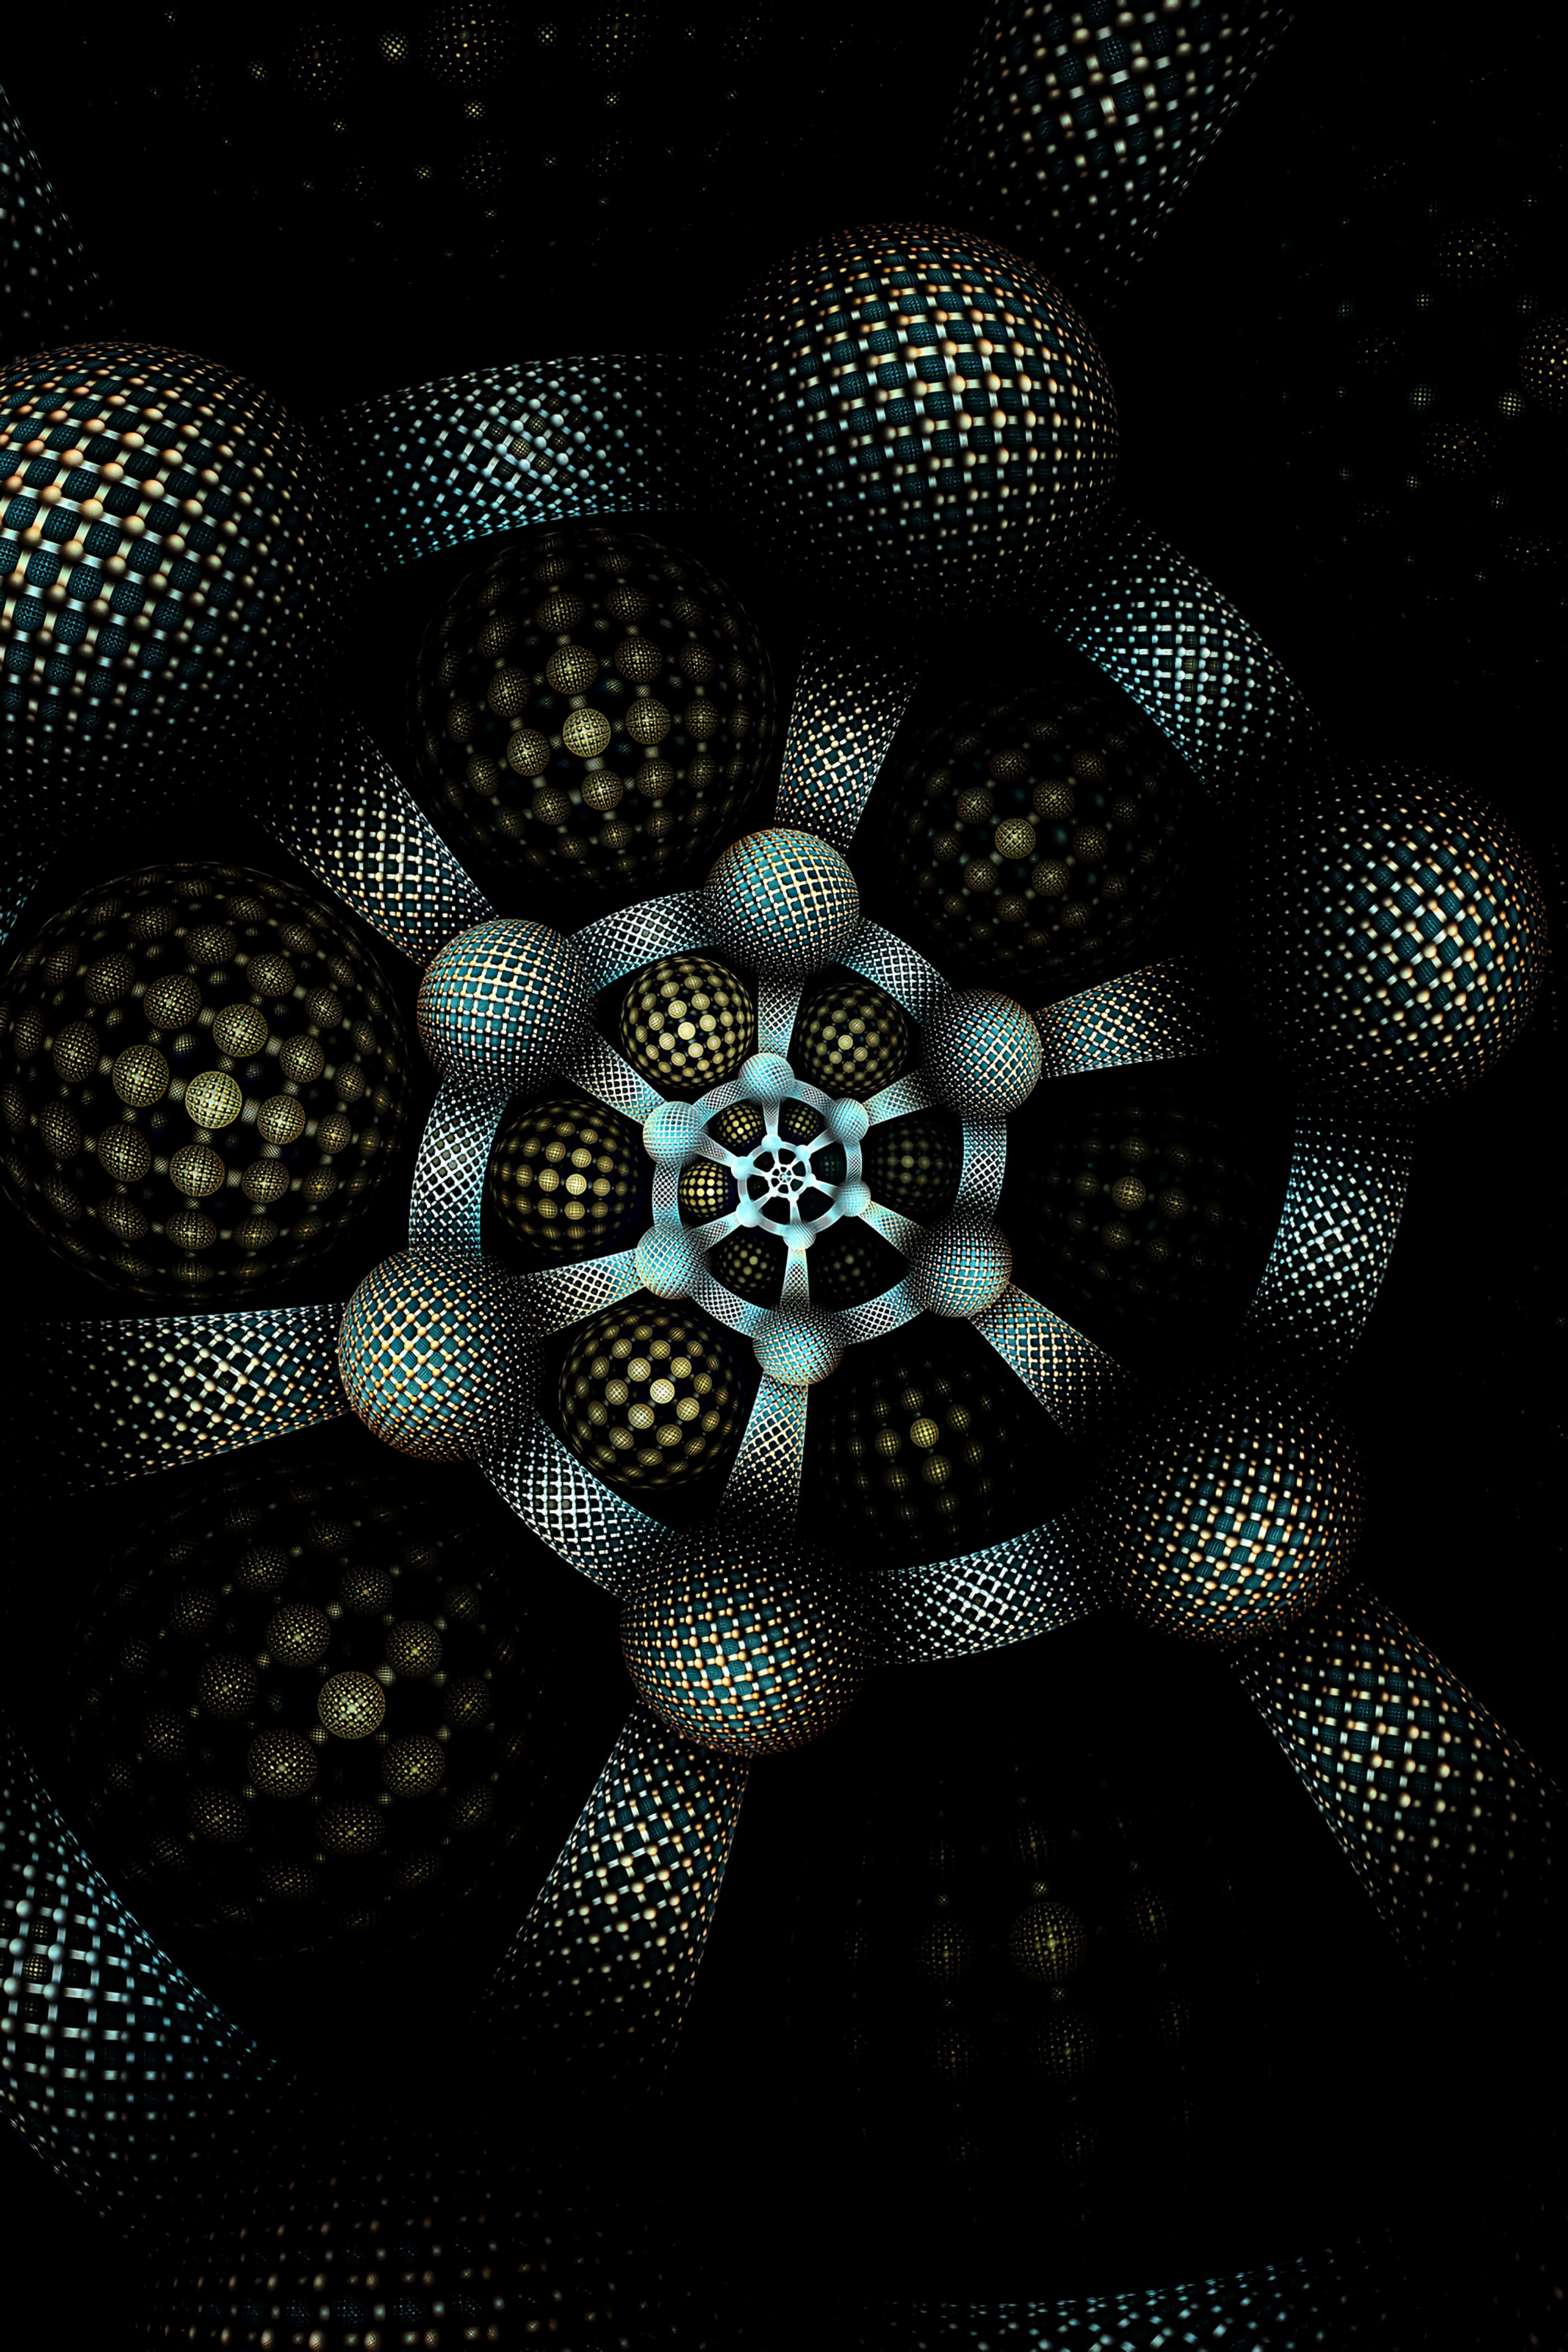 dark, circles, form, involute, abstract, pattern, fractal, swirling